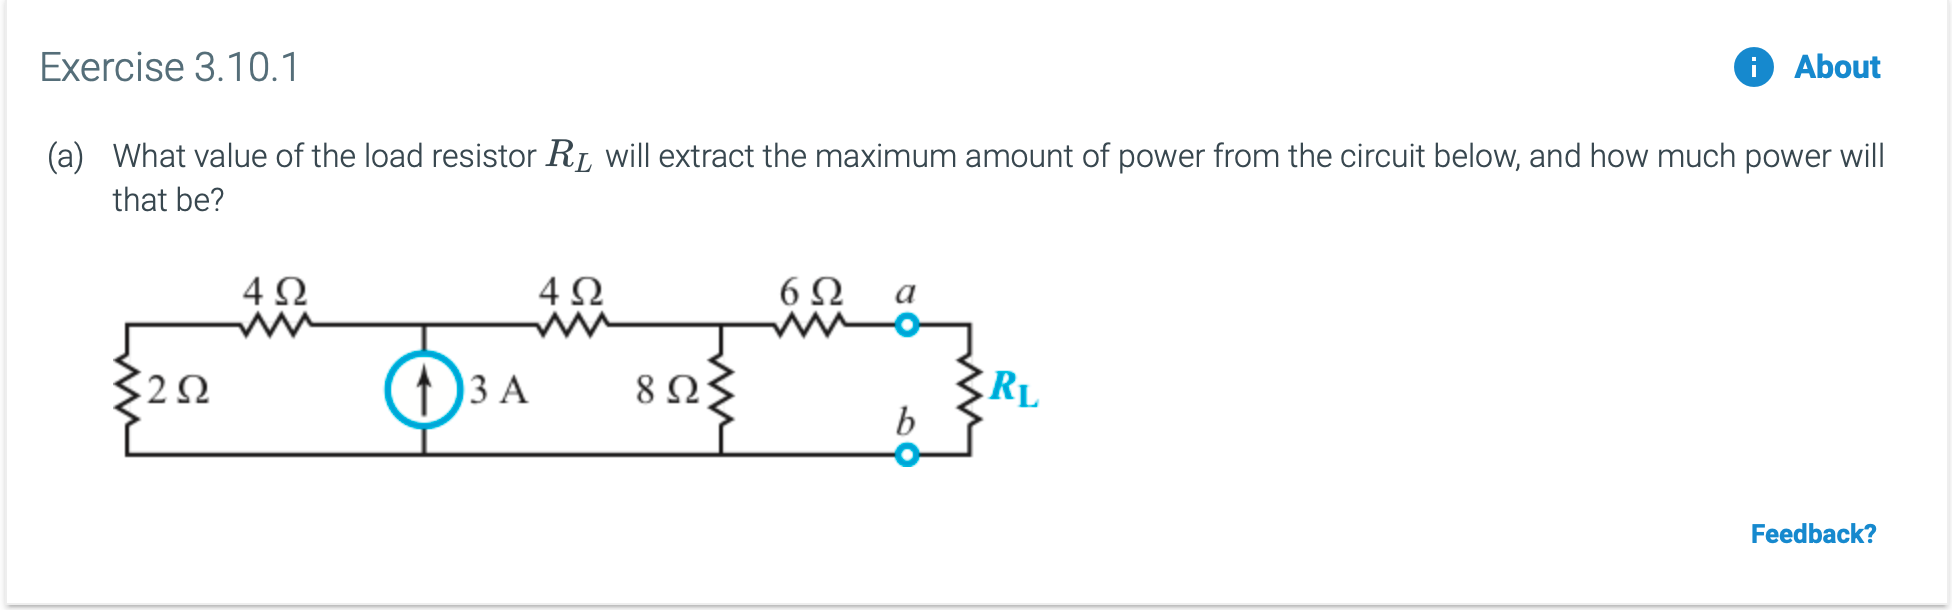 Exercise 3.10.1
About
What value of the load resistor R
(a)
will extract the maximum amount of power from the circuit below, and how much power will
that be?
6Ω
ww-
4Ω
4Ω
RL
b
8 Ω
) 3 A
Feedback?
ww
